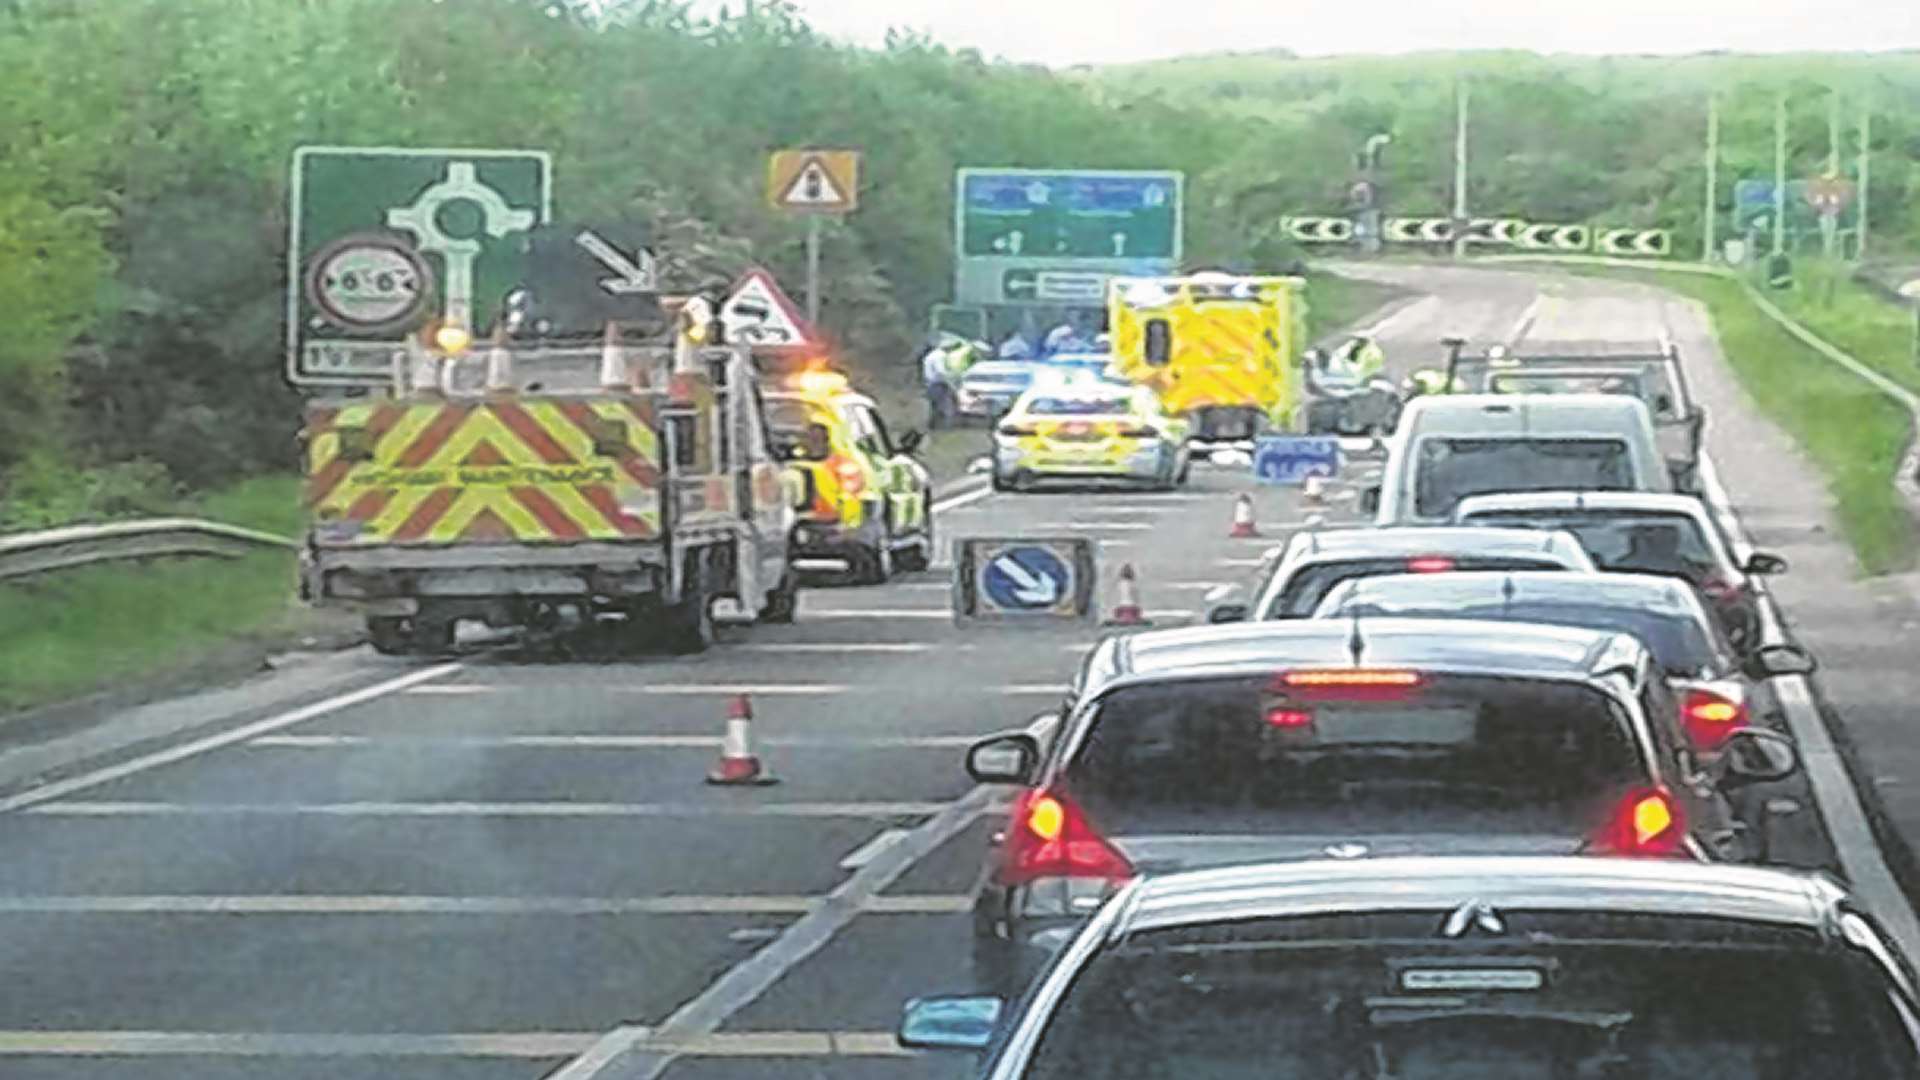 The roundabout has been the scene of numerous accidents which often cause huge delays